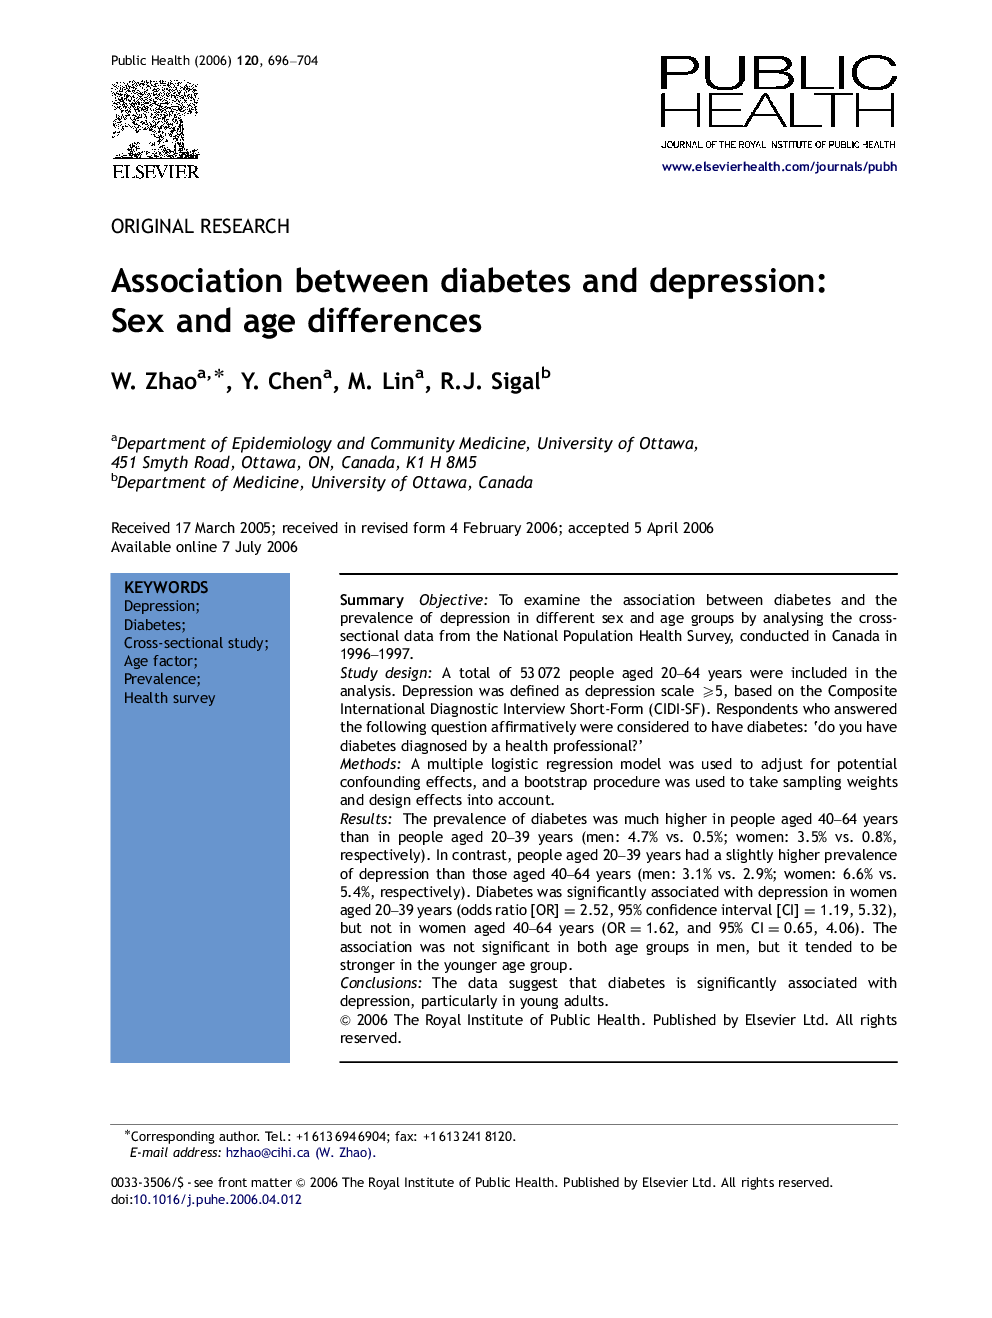 Association between diabetes and depression: Sex and age differences